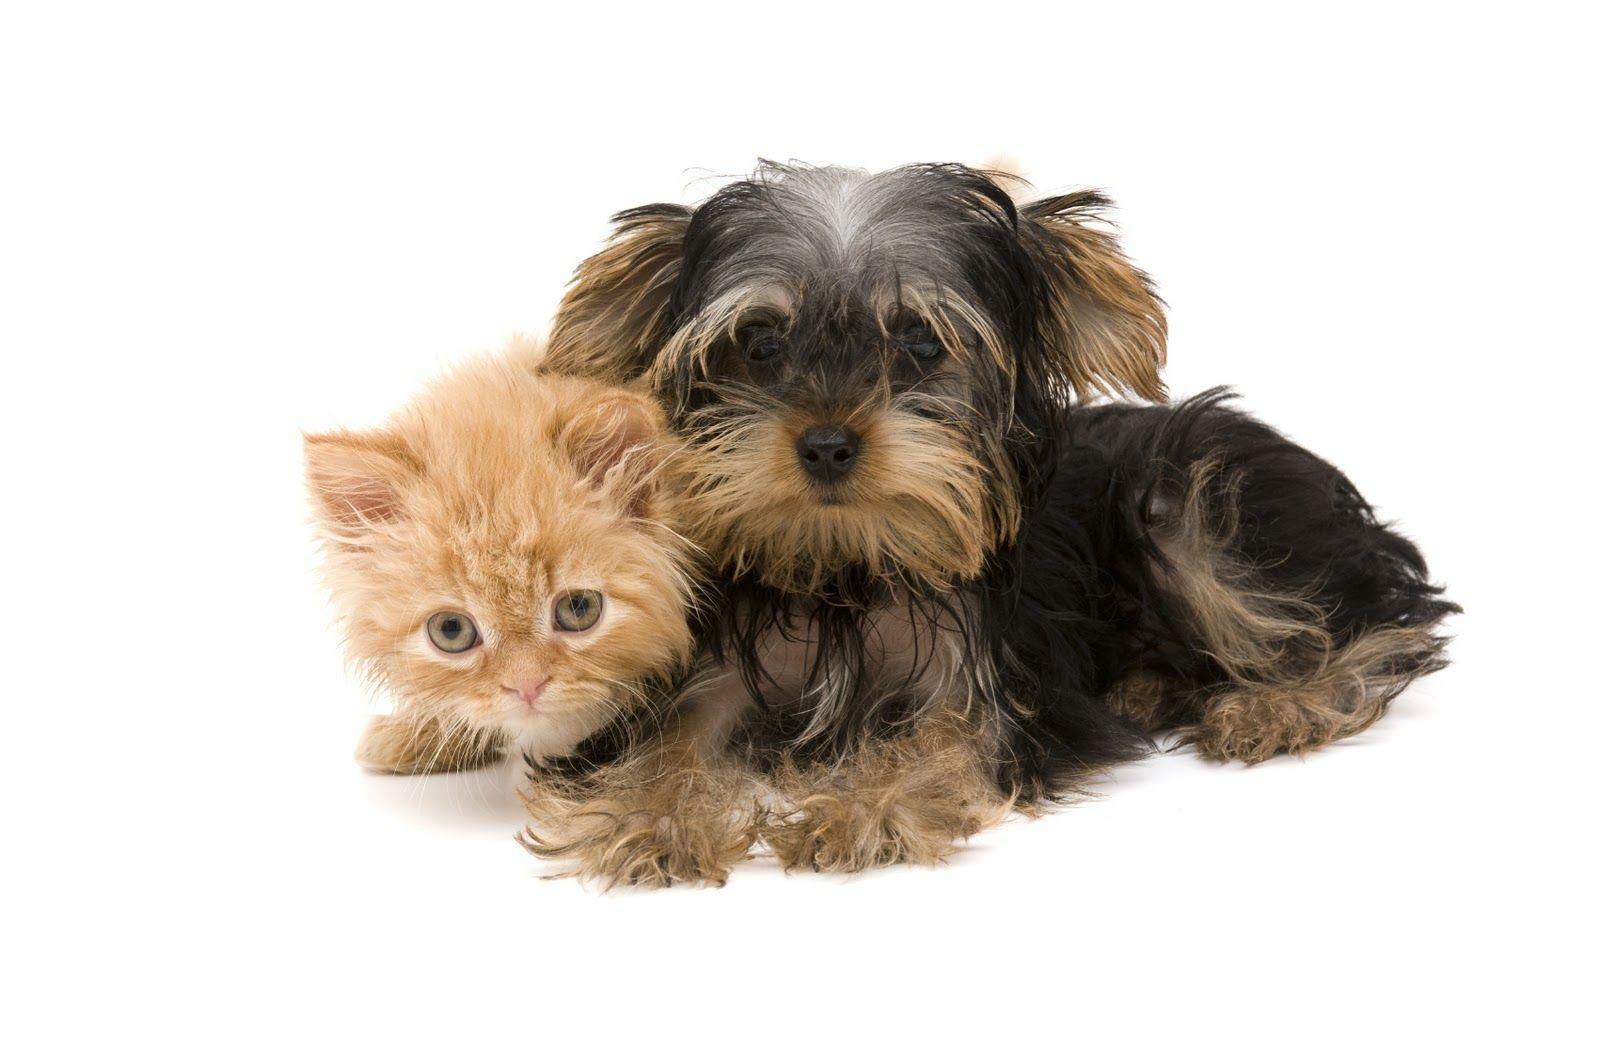 Cute Kittens and Puppies HD Wallpaper For Desktop Background